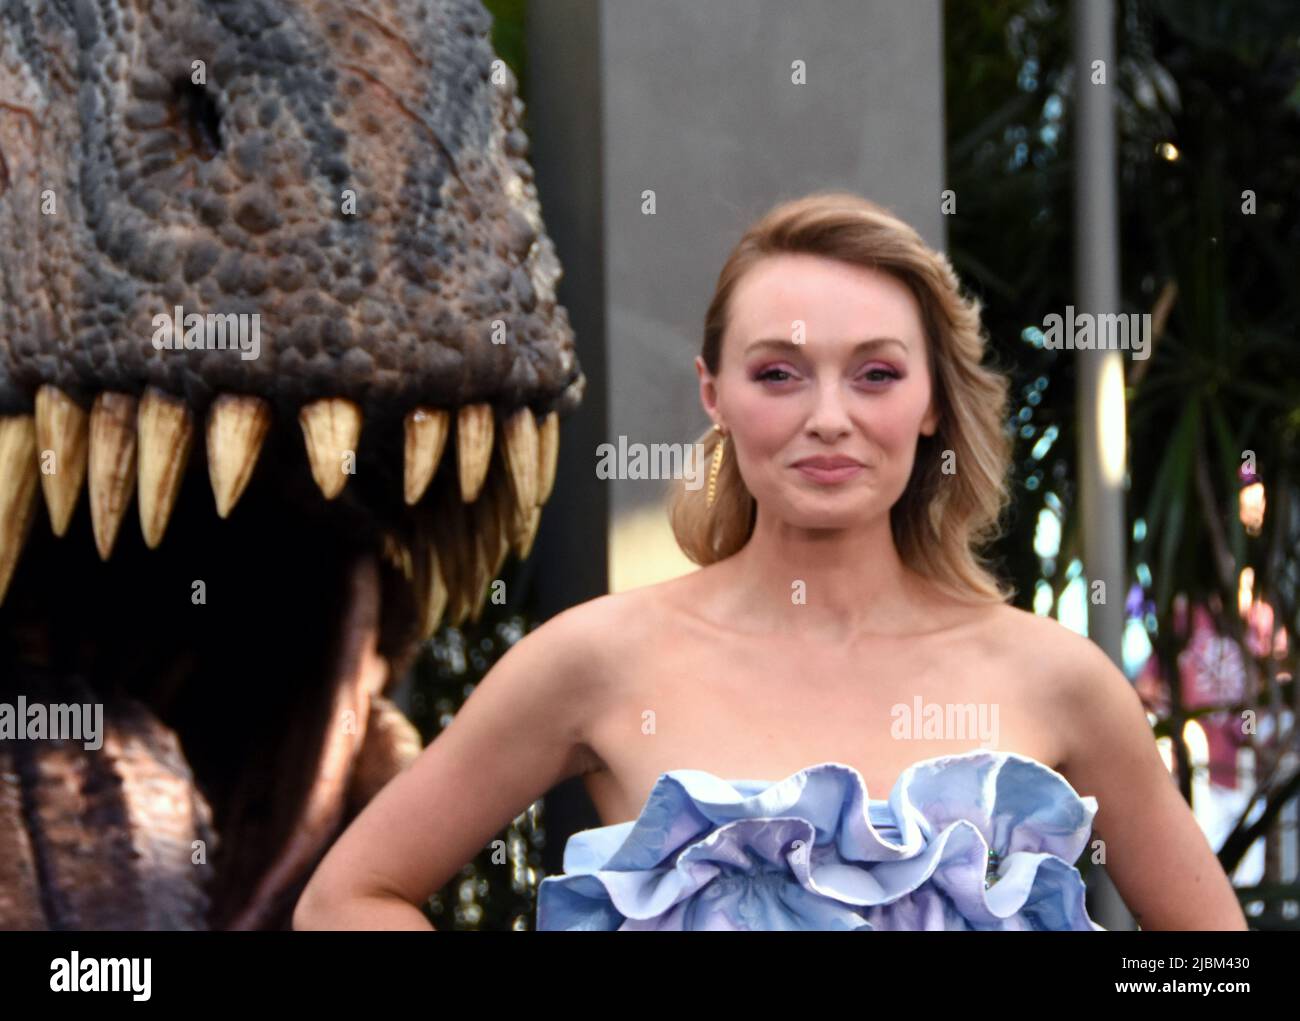 Hollywood, California, USA. 6th June, 2022. Actress Elva Trill attends Universal Pictures Presents The World Premiere of 'Jurassic World Dominion' at TCL Chinese Theatre on June 6, 2022 in Hollywood, California, USA. Credit: Barry King/Alamy Live News Stock Photo